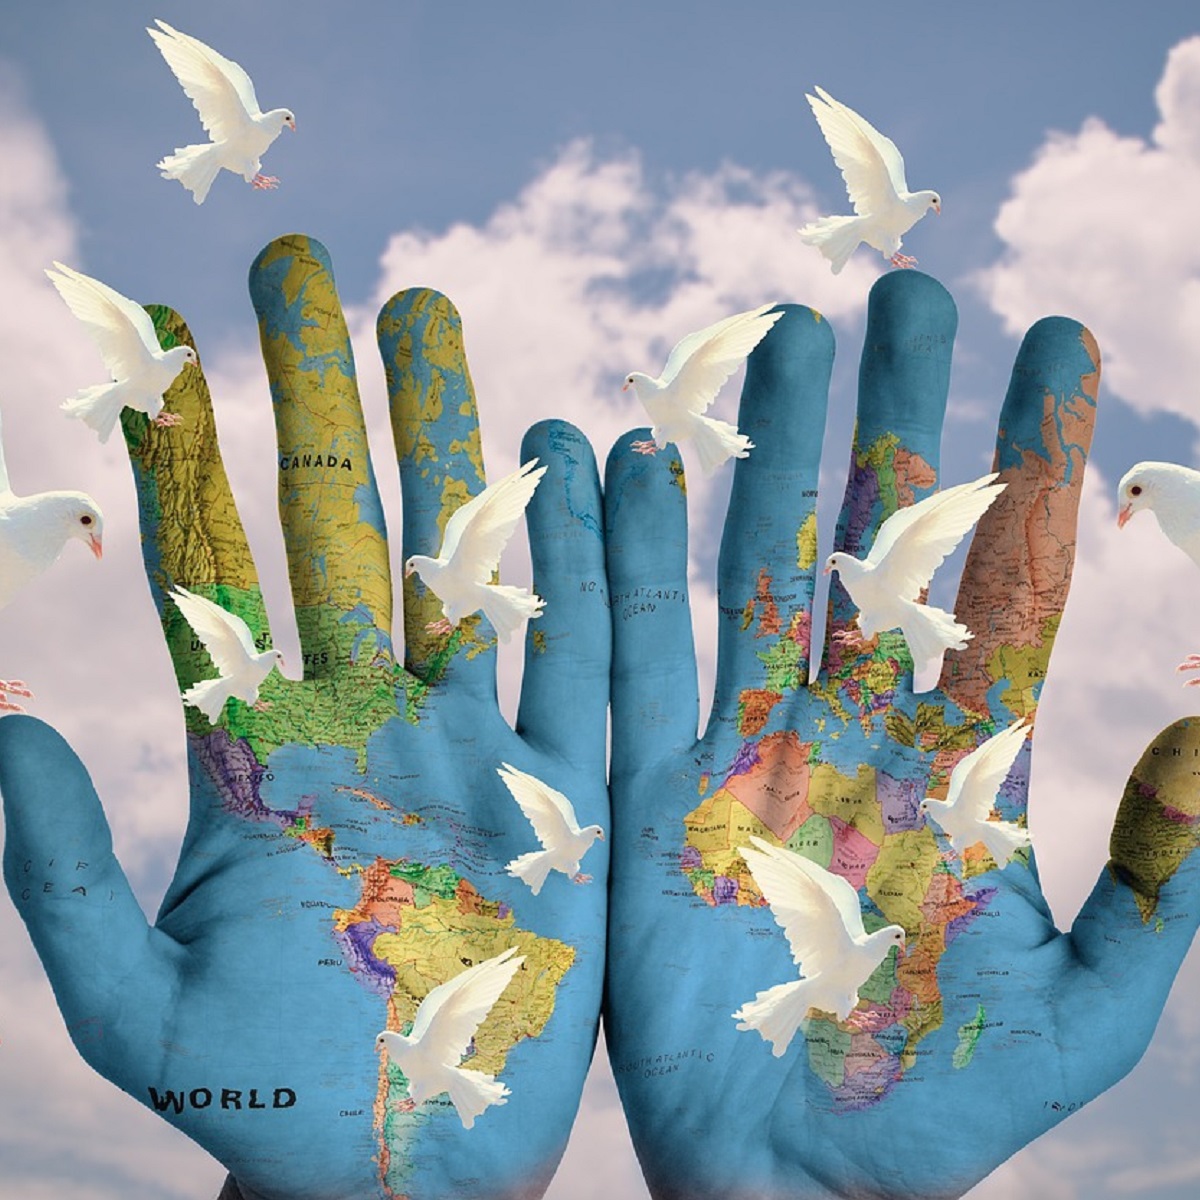 Two hands painted as a map of the world with doves flying around them